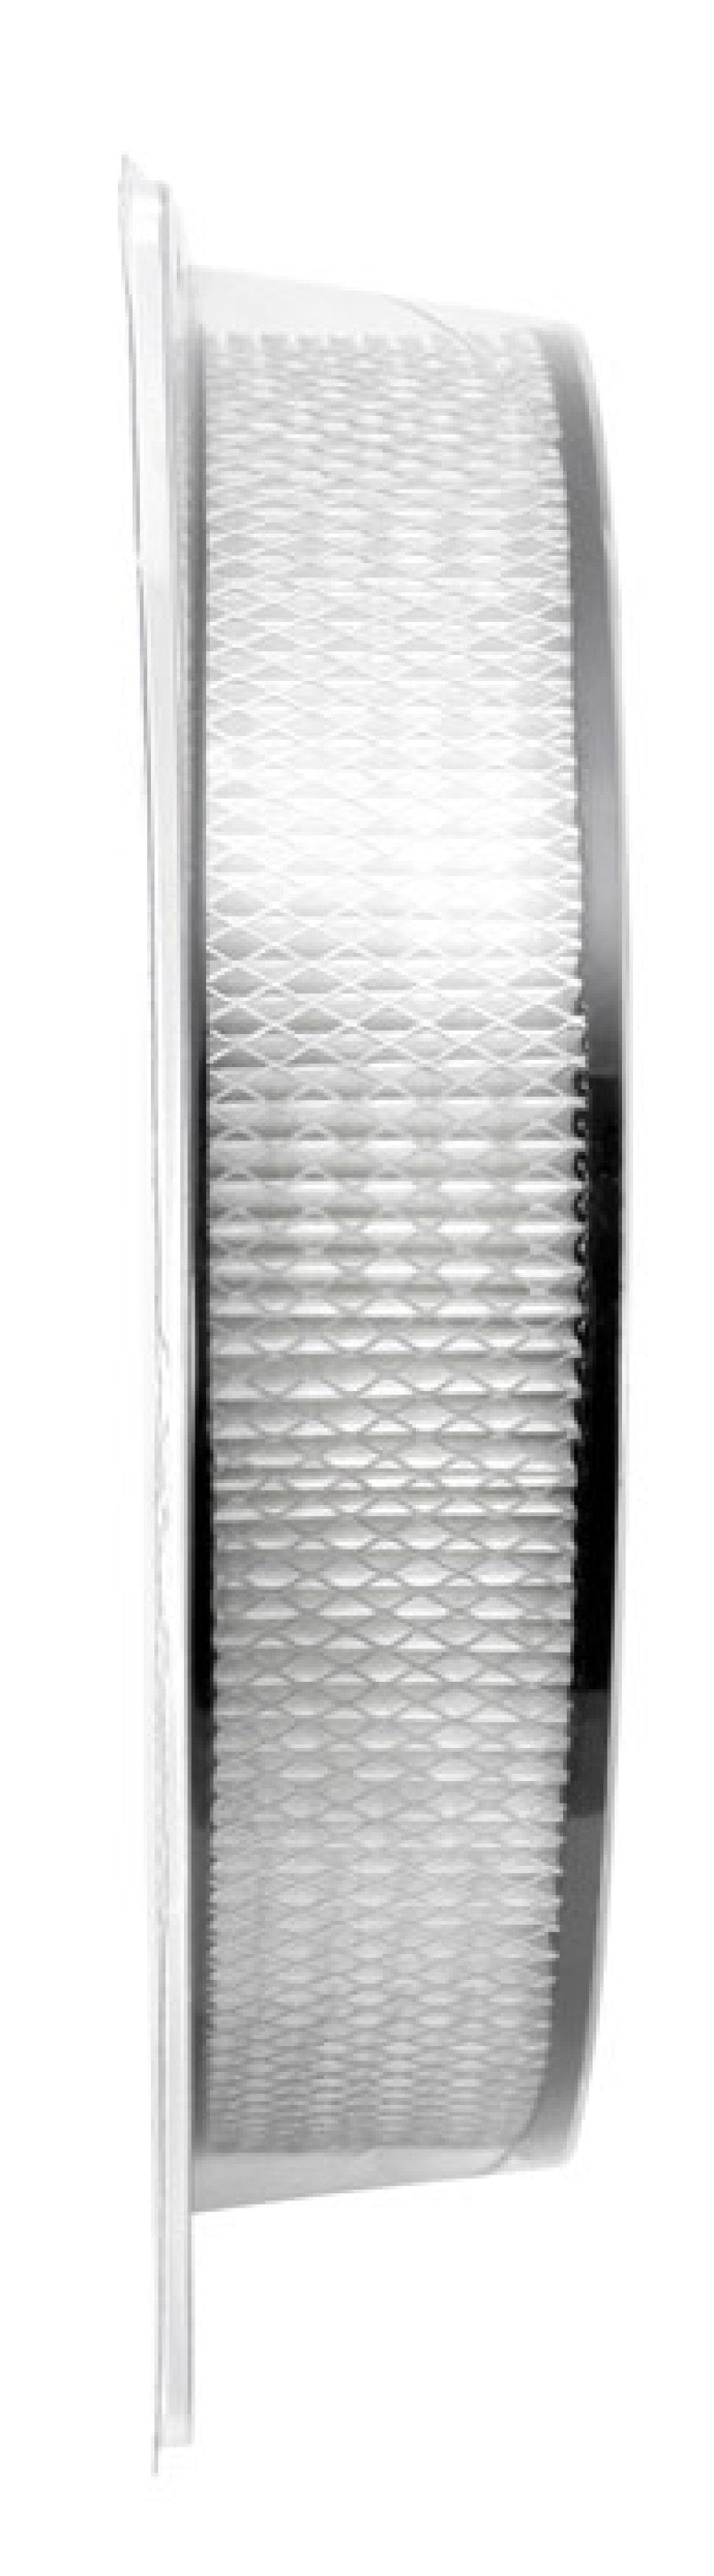 Spectre Round Air Filter 14in. x 3in. - White (Paper)